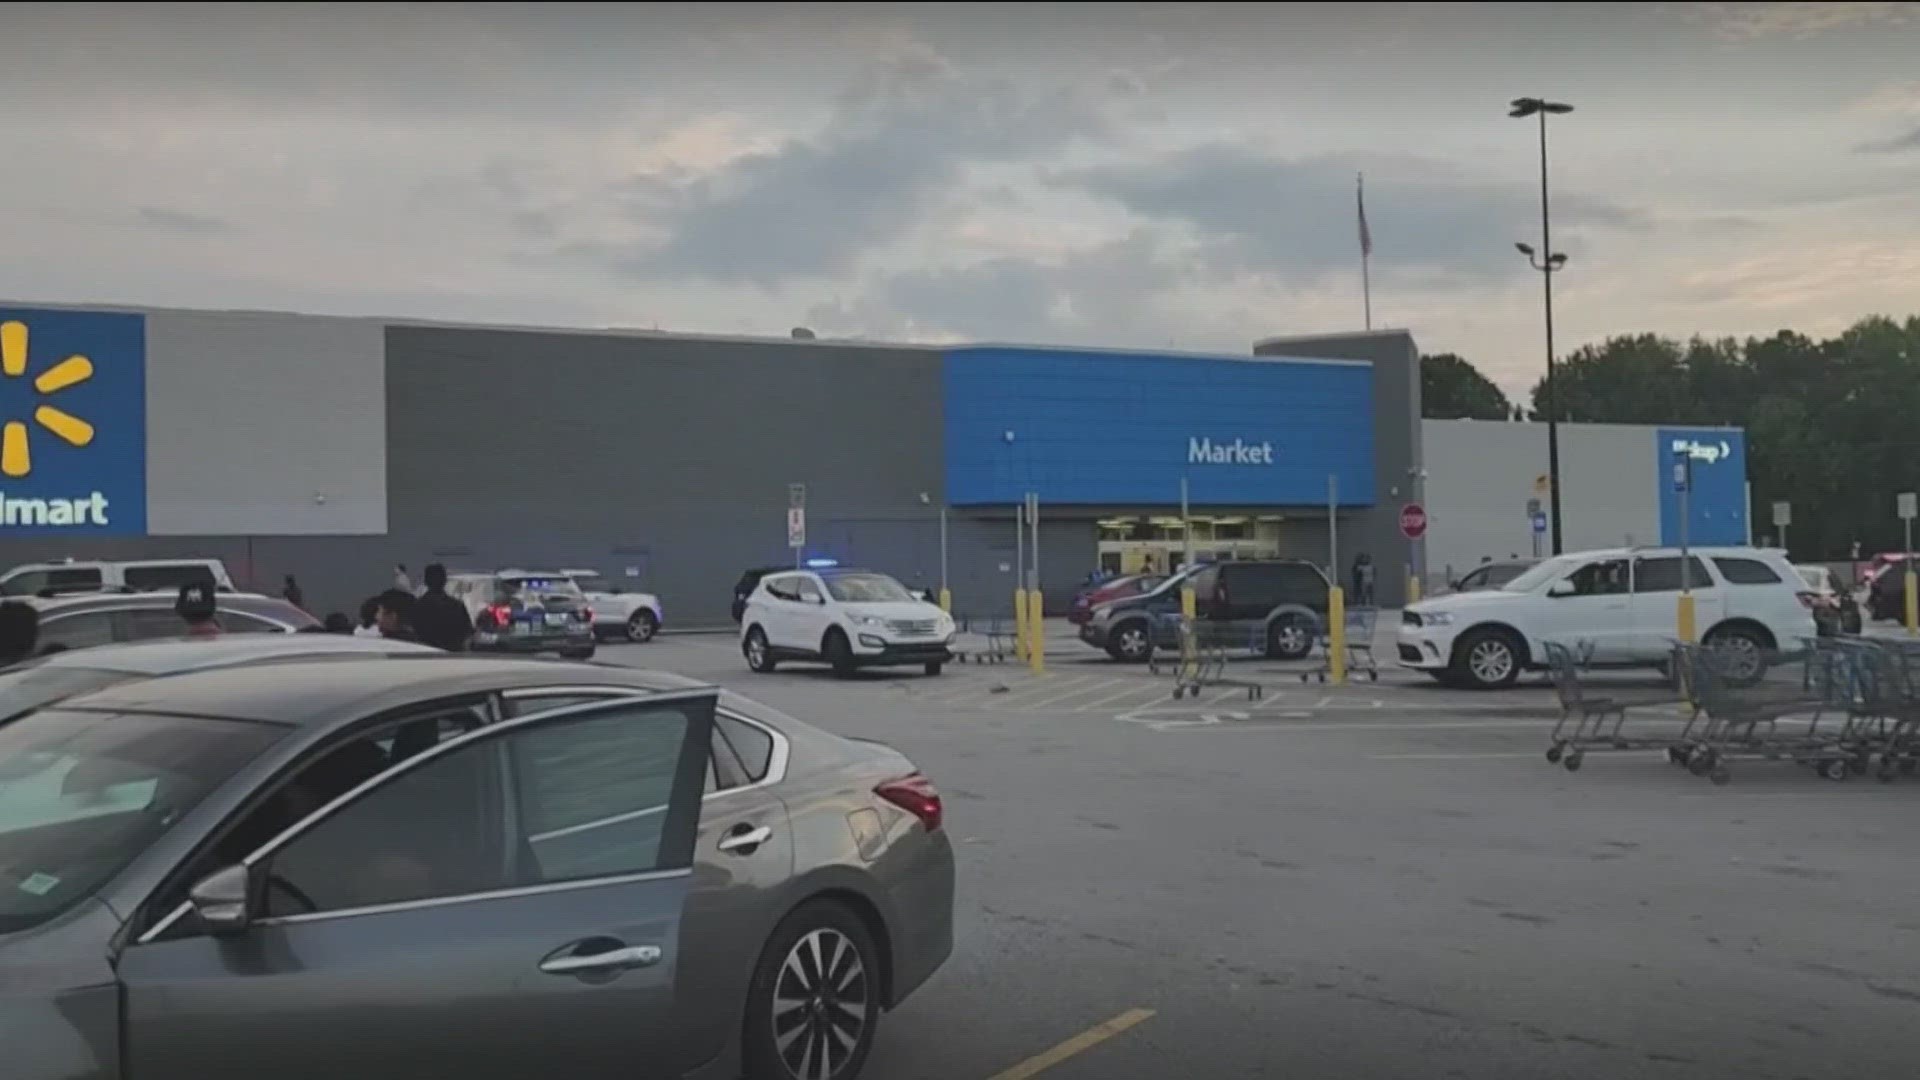 Authorities said the shooting happened at 4166 Jimmy Lee Smith Parkway, which is a Walmart Supercenter located in Hiram.